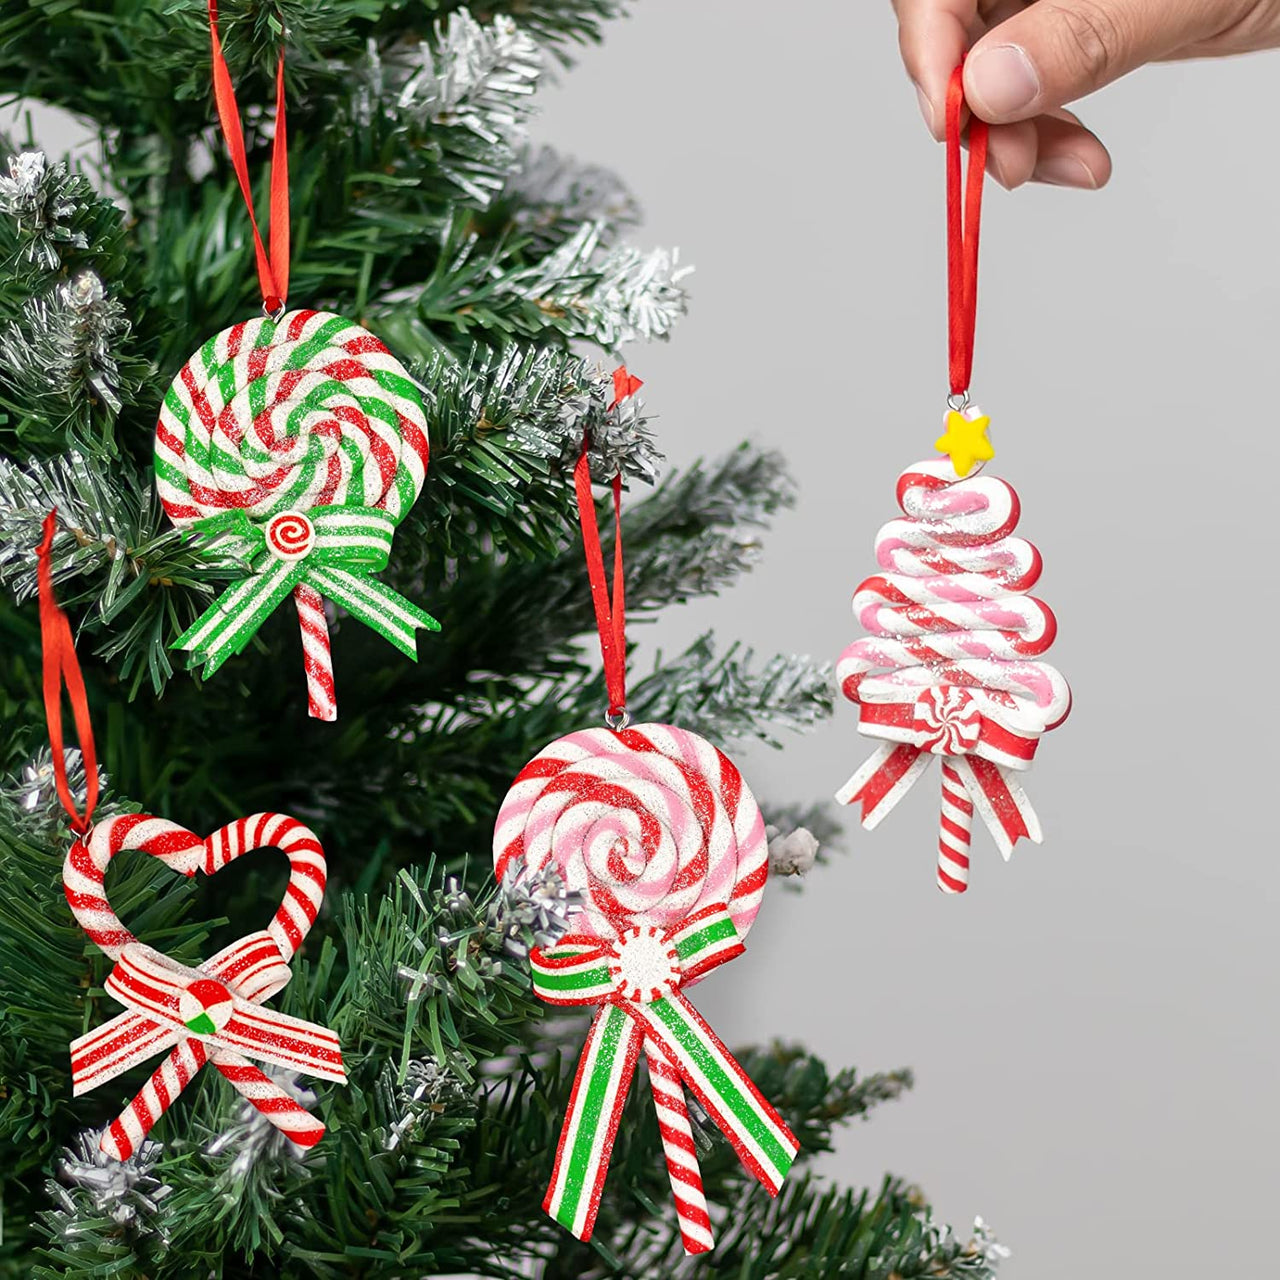 10Pcs Christmas Candy Lollipop Ornaments for Christmas Tree Decorations- Glitter Hanging Candy Cane Ornaments Polymer Clay Christmas Peppermint Decor with Ribbon for Xmas Tree Holiday Party Home Decor